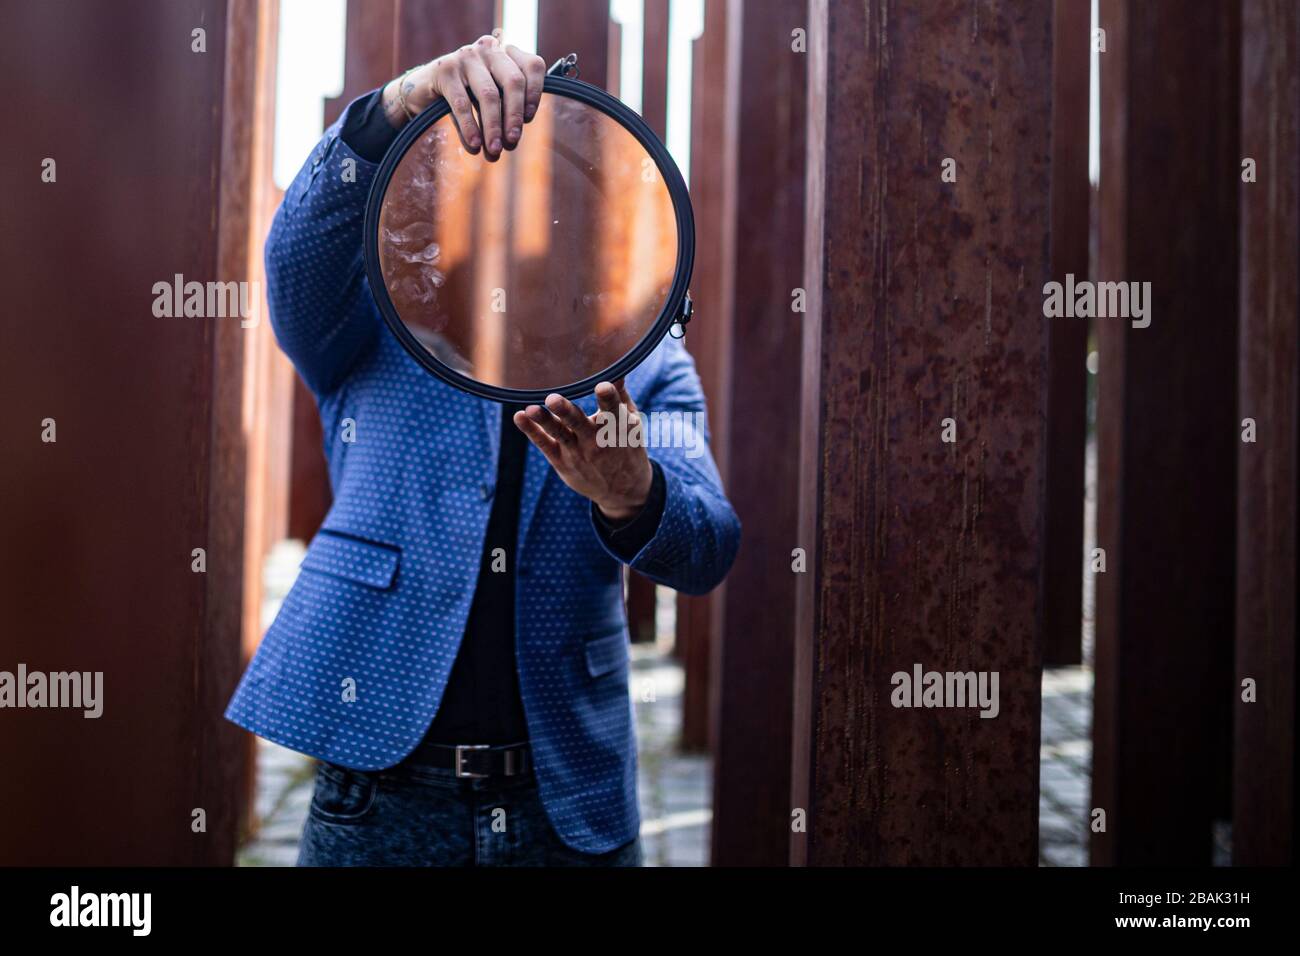 Portrait of a young male athlete in elegant, stylish outfit among raw, rusty iron poles Stock Photo